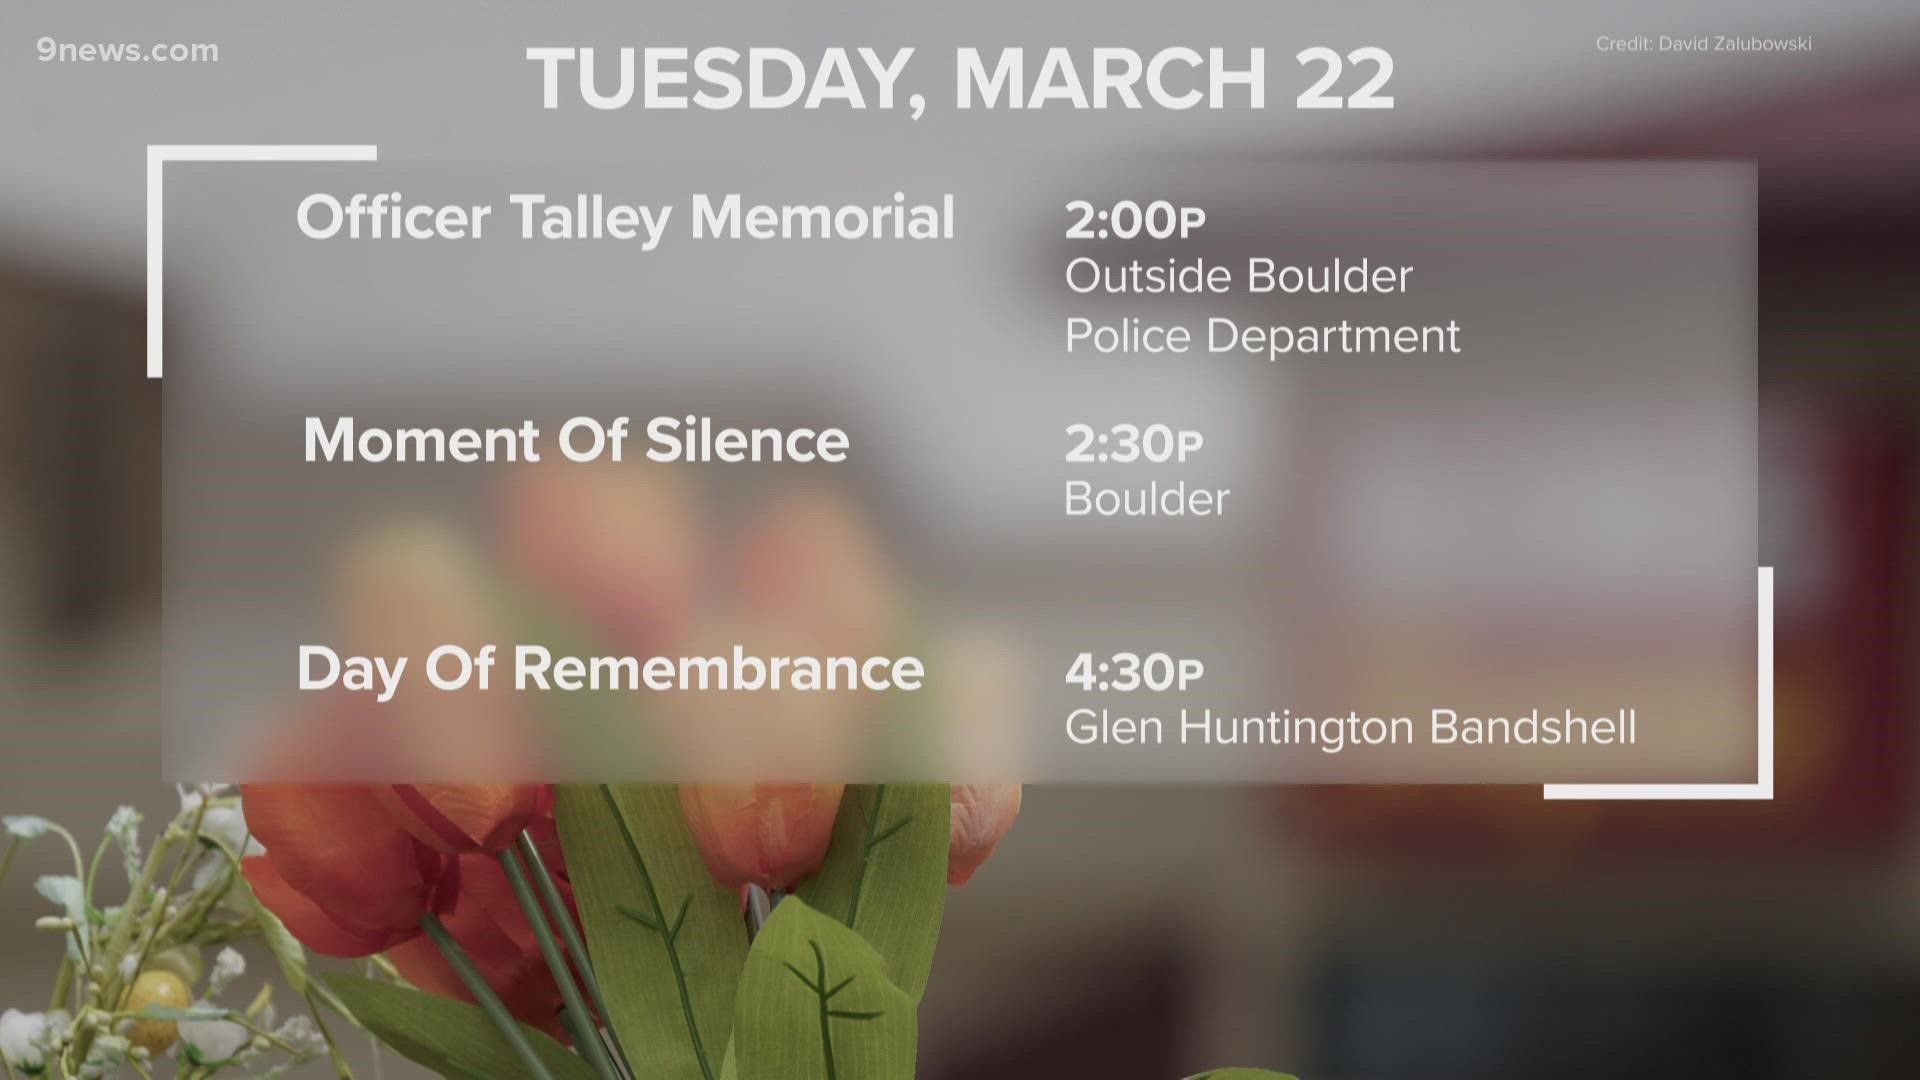 The City of Boulder will commemorate the deaths of the 10 victims of the King Soopers shooting a year ago with Day of Remembrance events on Tuesday.